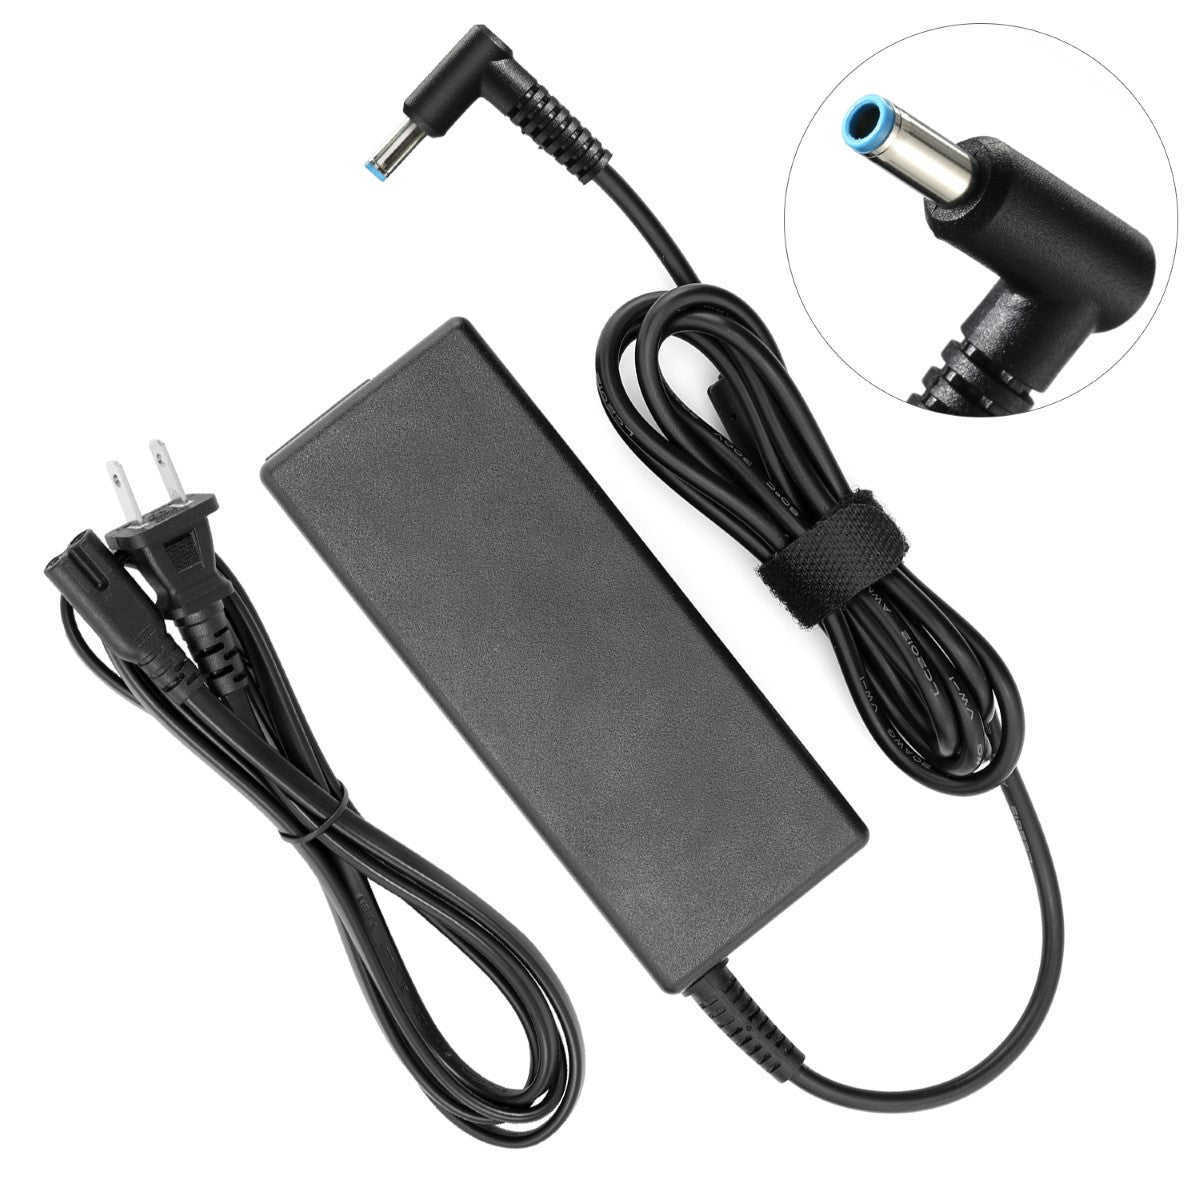 AC Adapter Charger for HP EliteBook 755 G4 Notebook